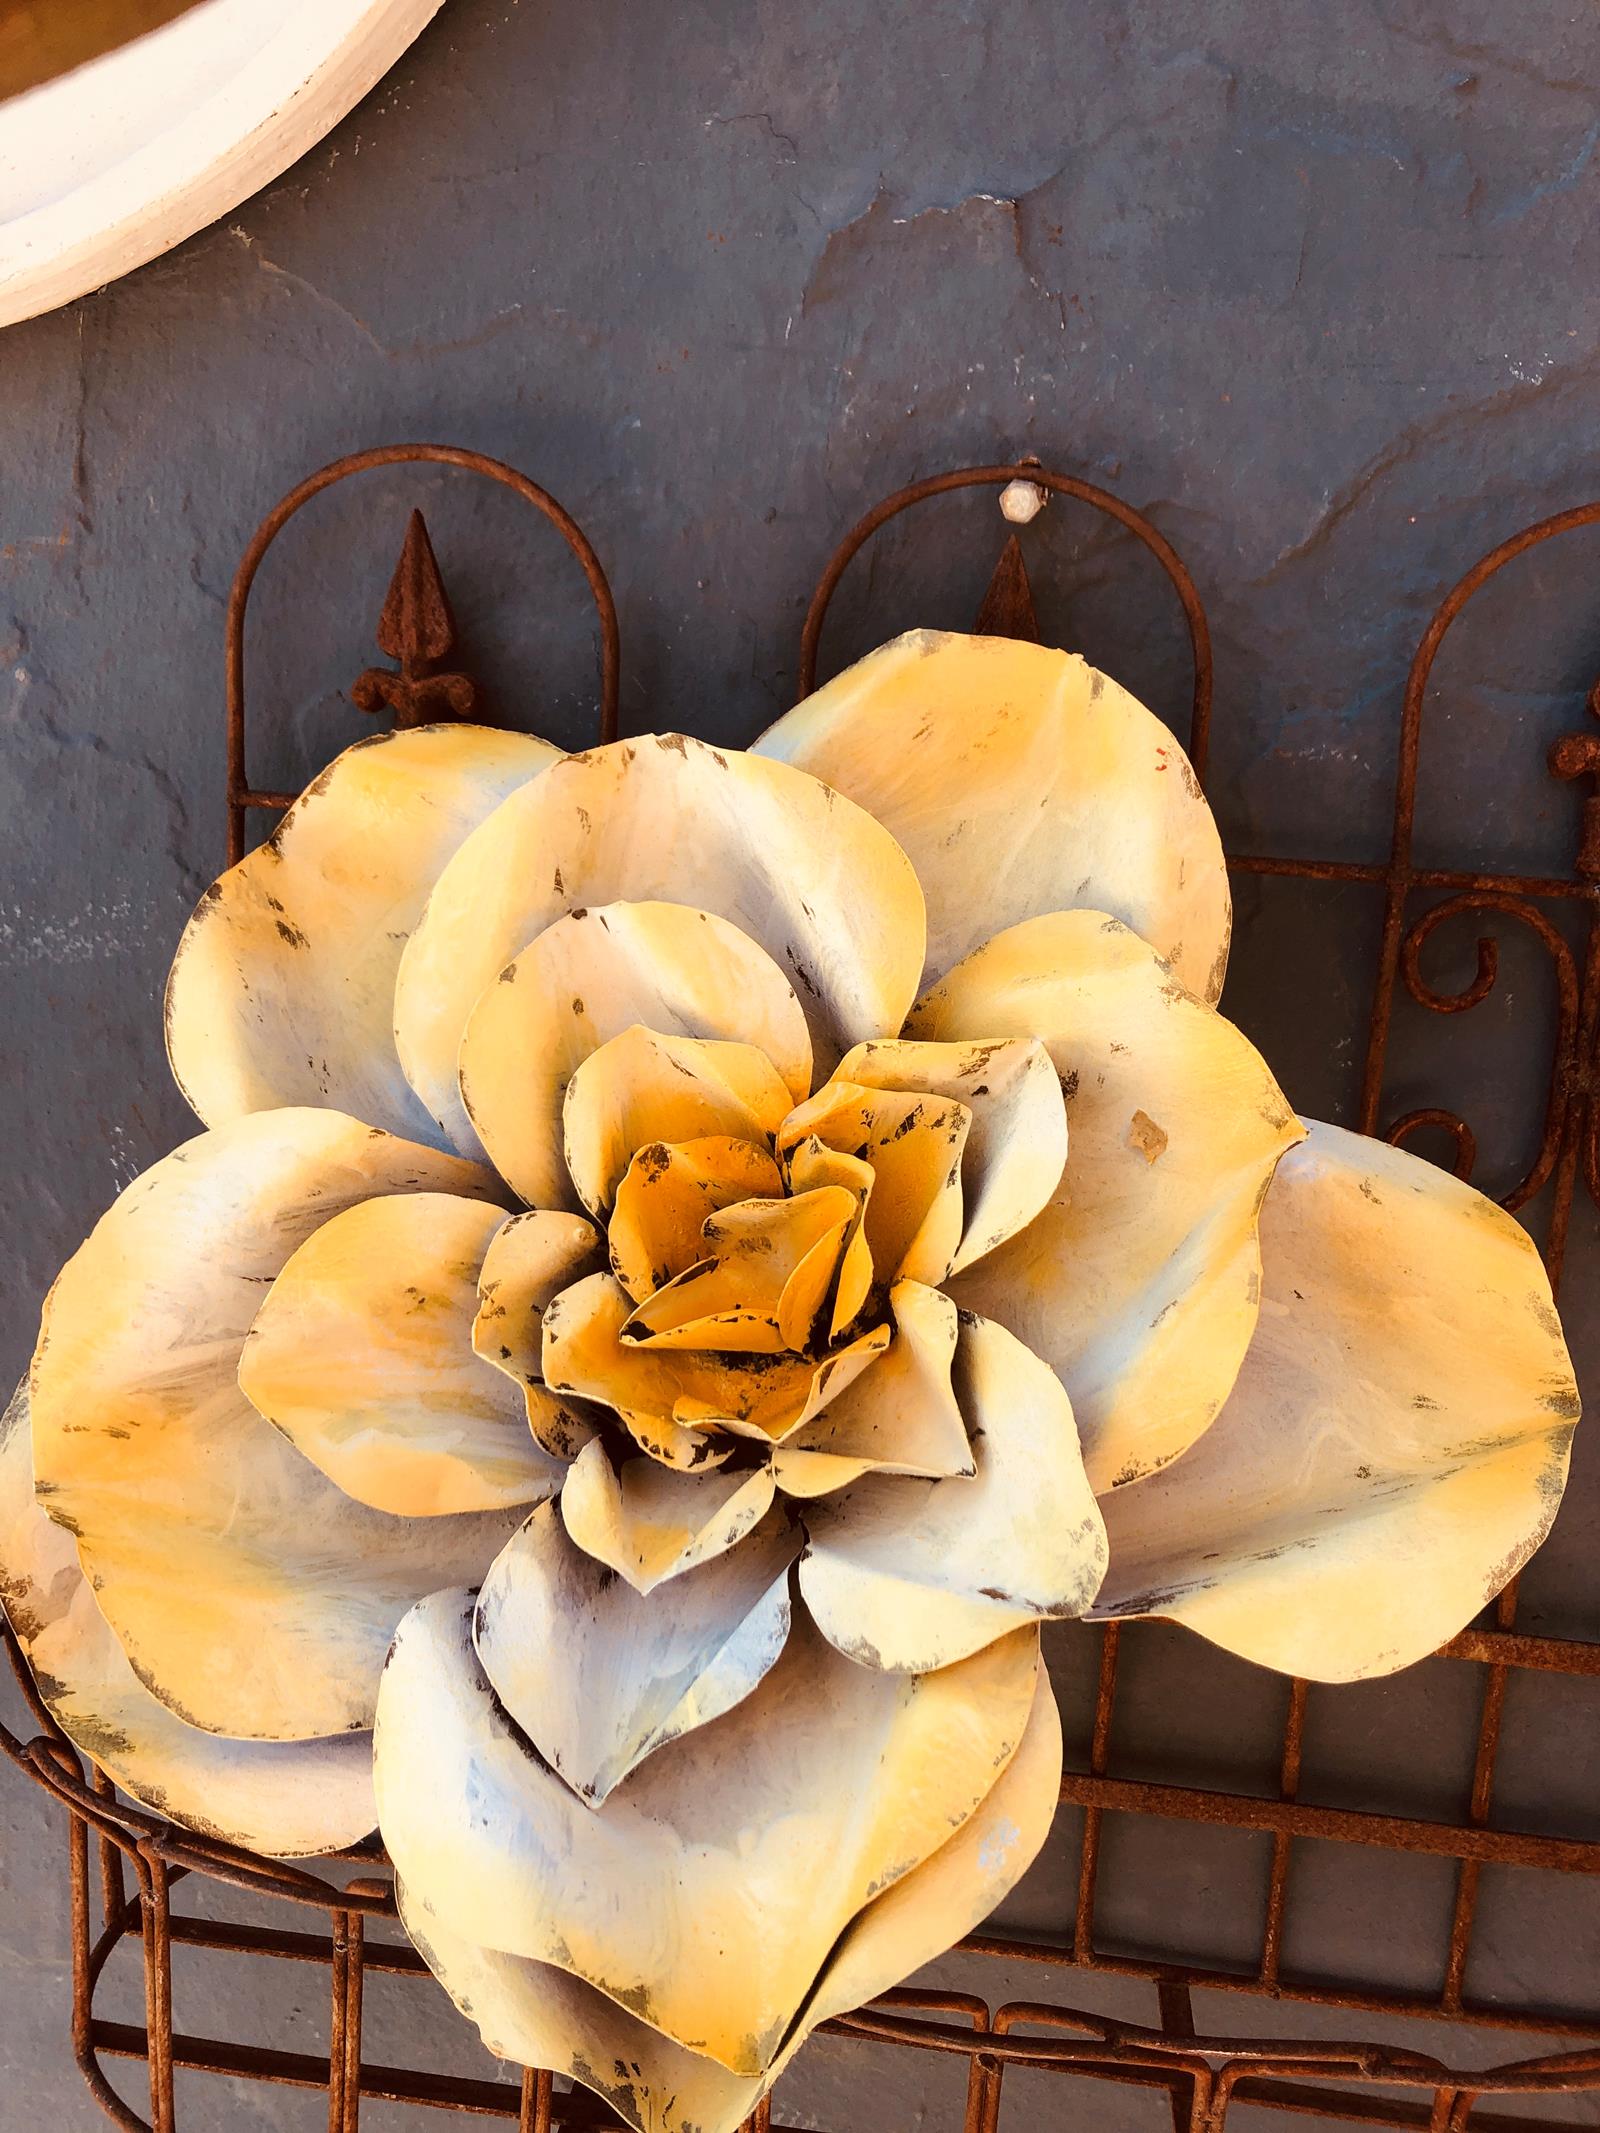 Big flowers &#55356; that beg hello’s from neighbors . Metal art flowers . Giant roses &#55356; and (..)